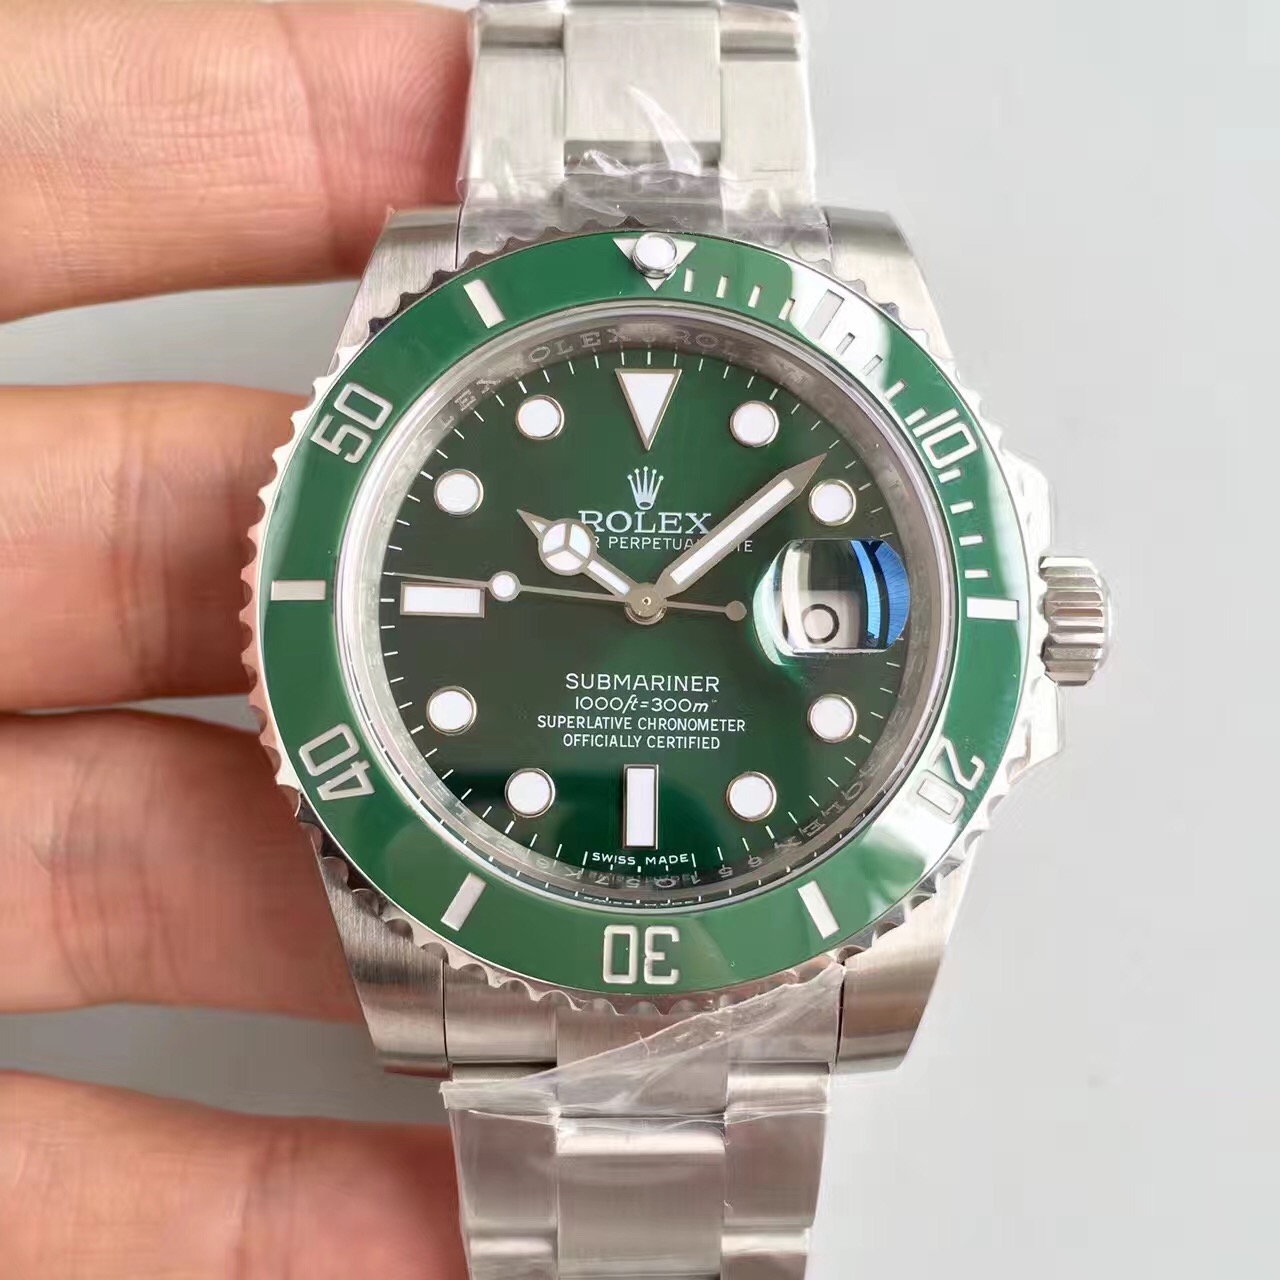 N Factory Rolex Green Water Ghost v7 Edition SUB Submariner series 116610LV, men's watch. v7 has been discontinued, v8 upgrade version can be purchased - Click Image to Close